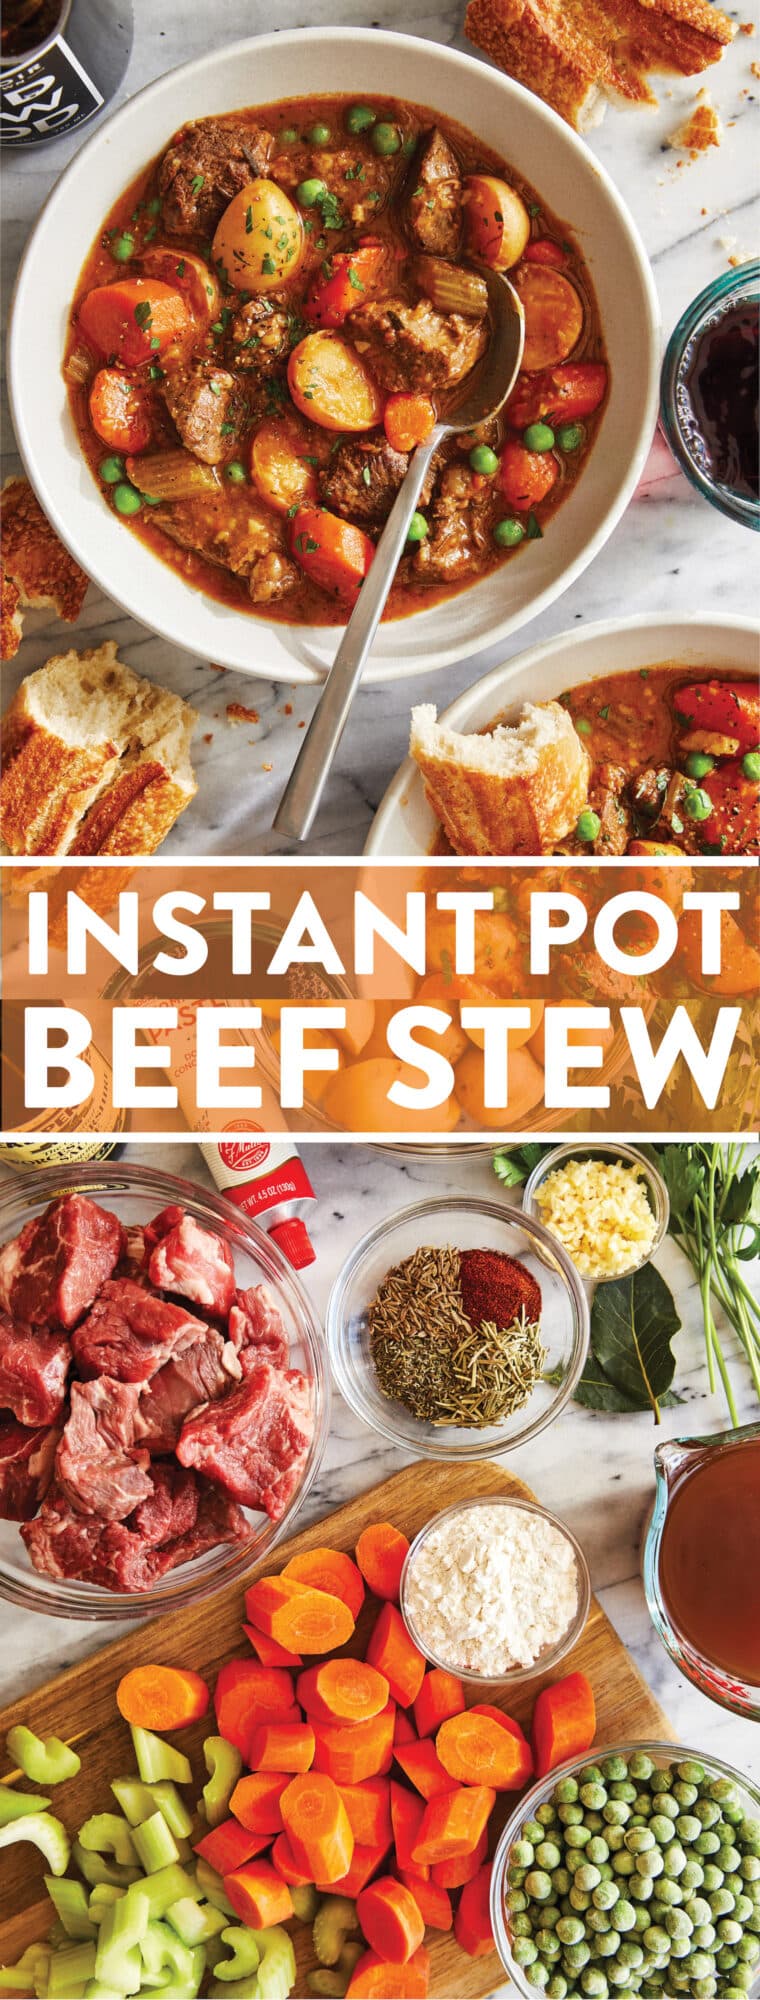 Instant Pot Beef Stew (Dinner For Two) - Homemade In Kitchen